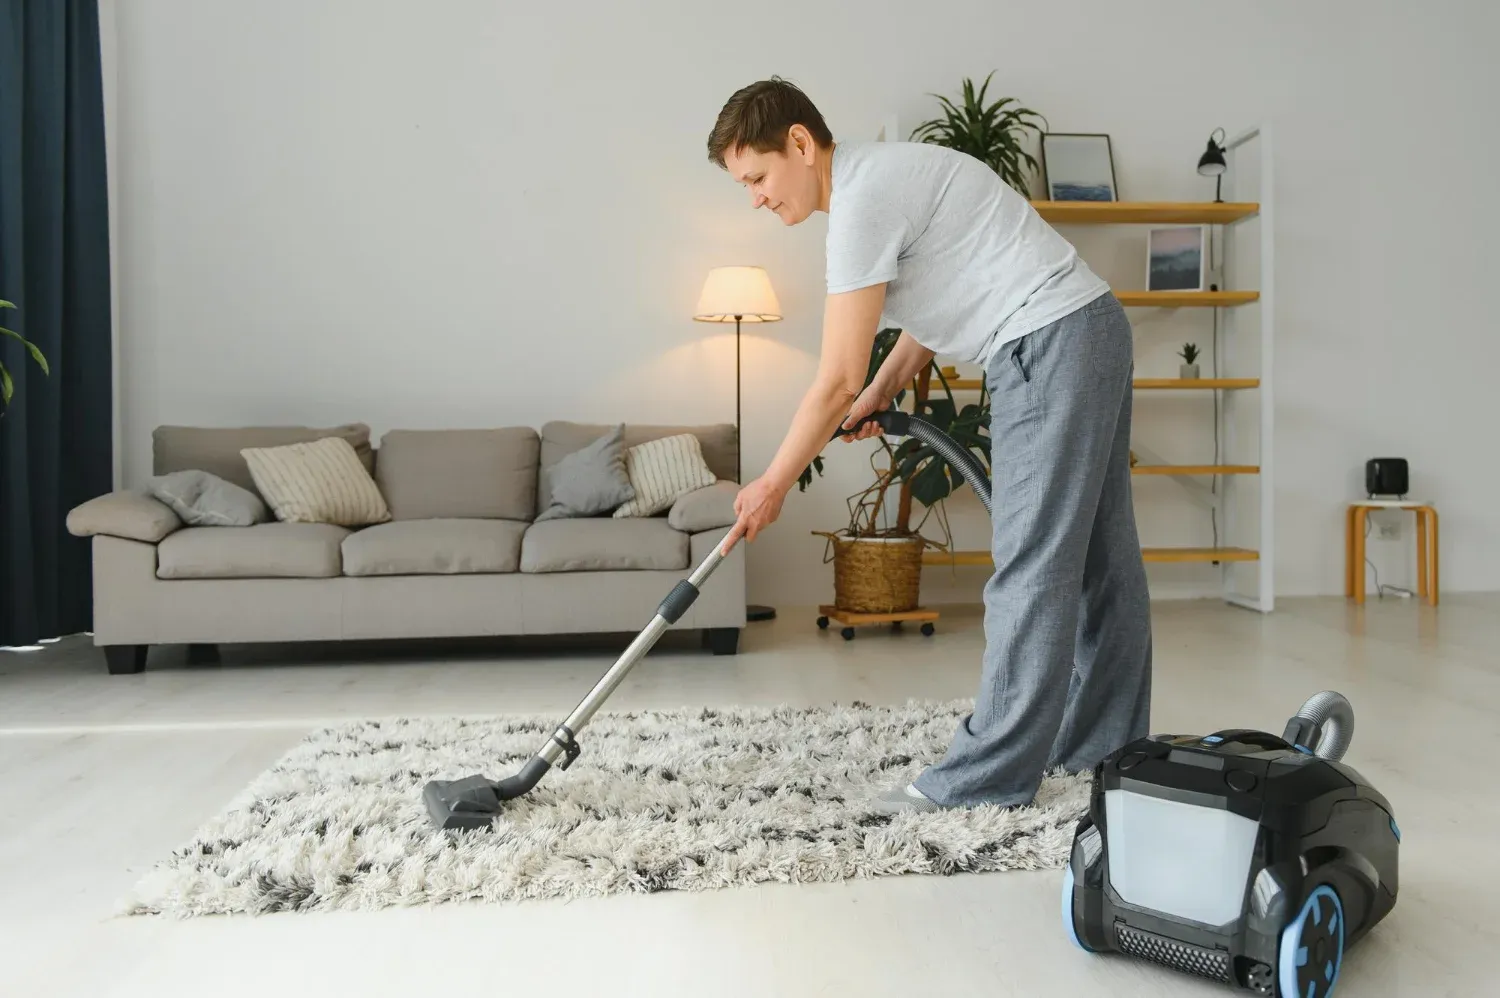 Cost effective New Westminster area rug cleaner